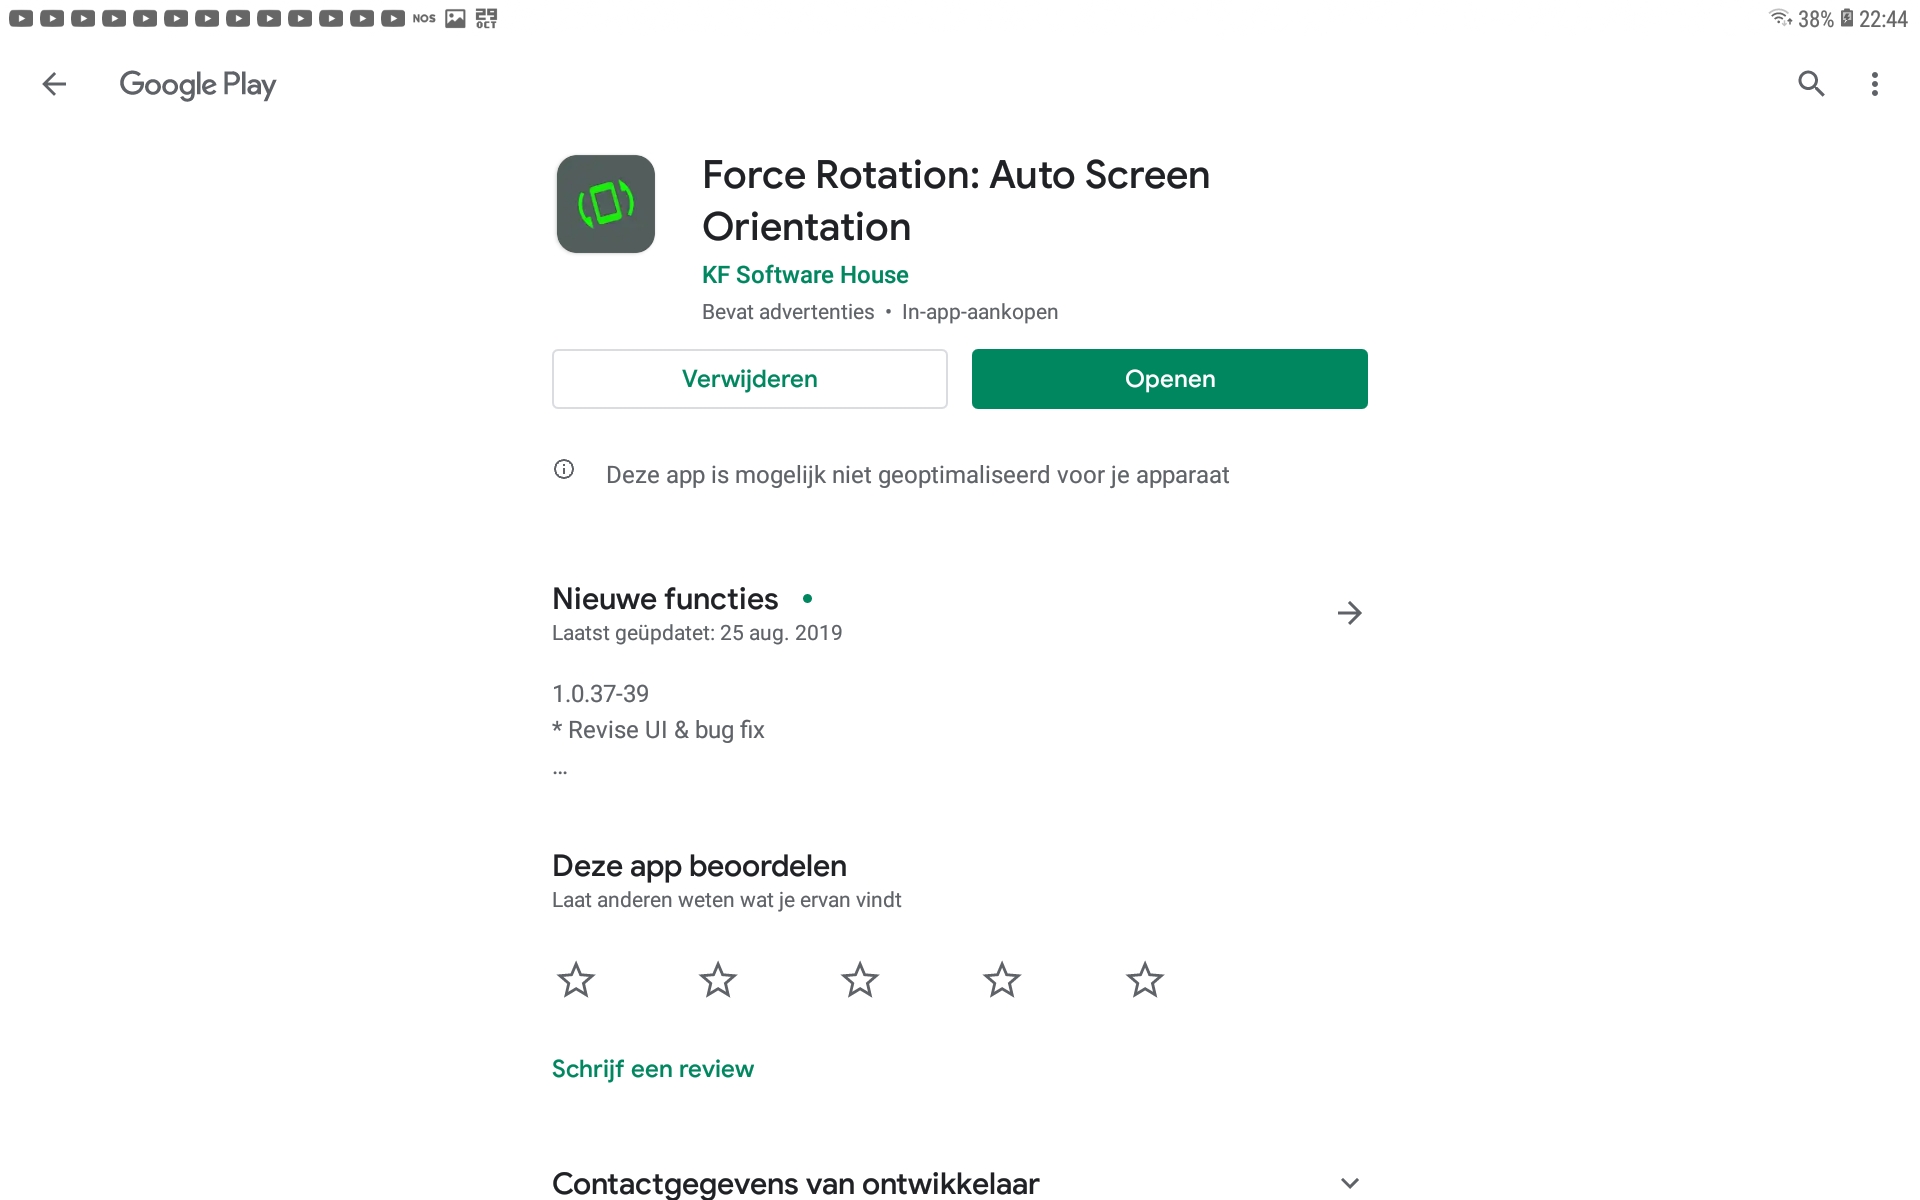 Google Play Store: Forece Rotation - Open button